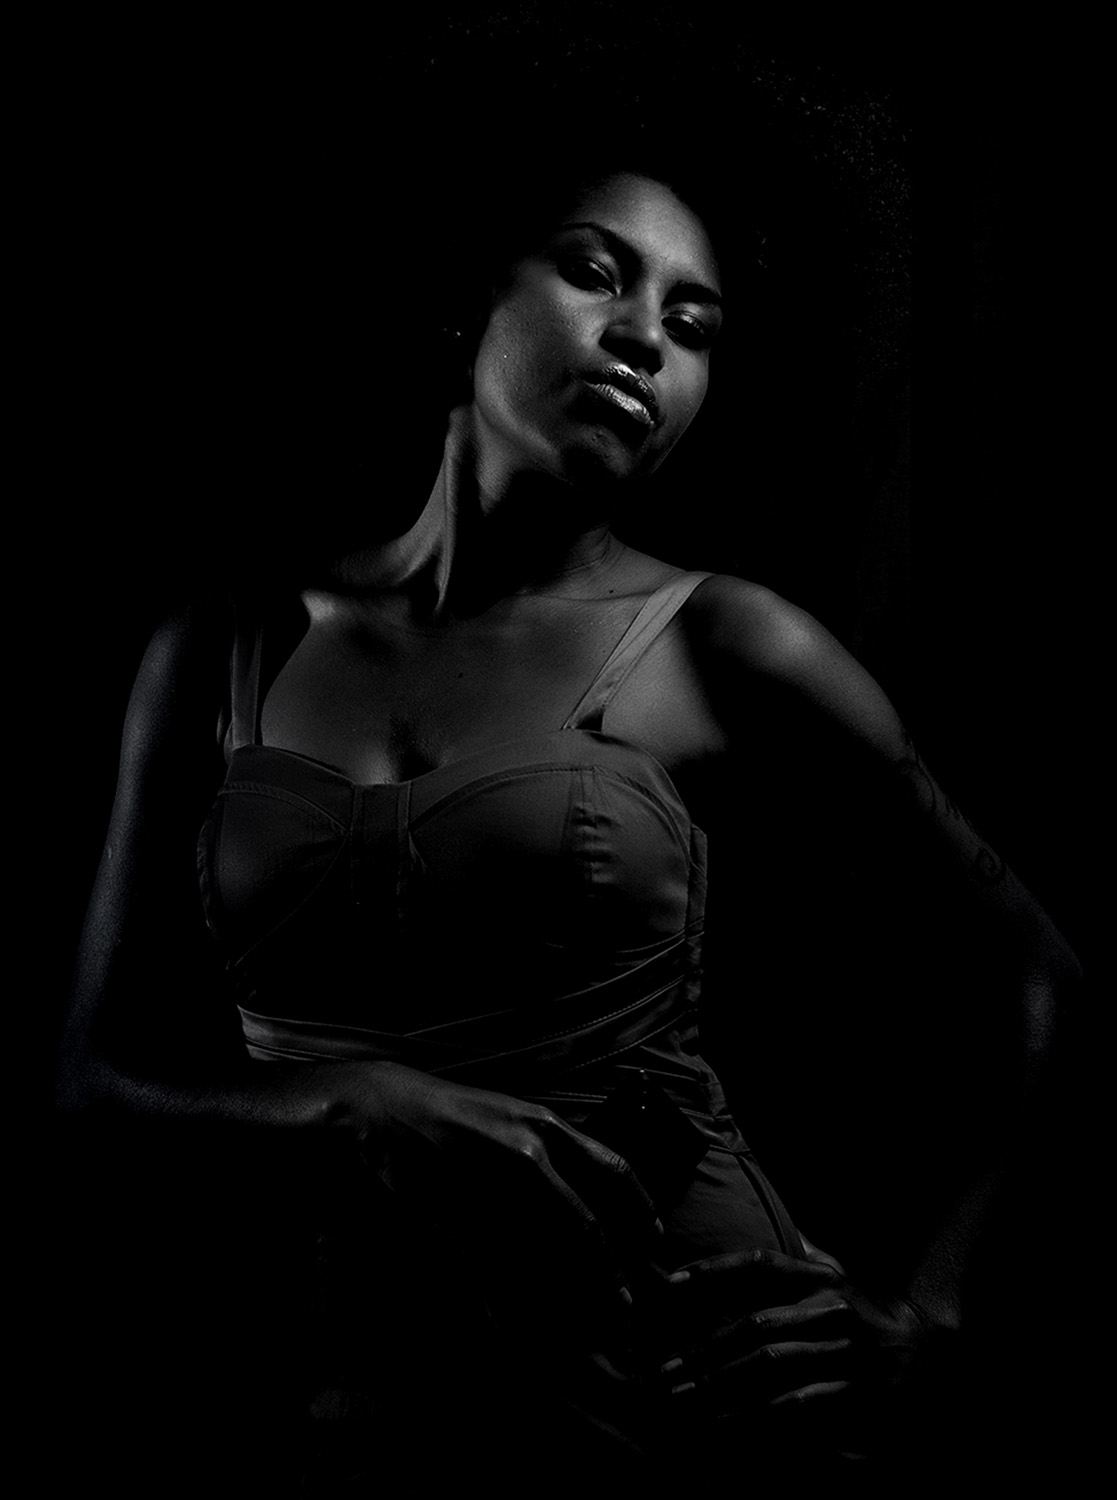 image of AARONTAIT COPYRIGHTED 2014 112 ADVERTISING PNG GIRL BLACK AND WHITE PORTRAIT FASHION BEAUTY